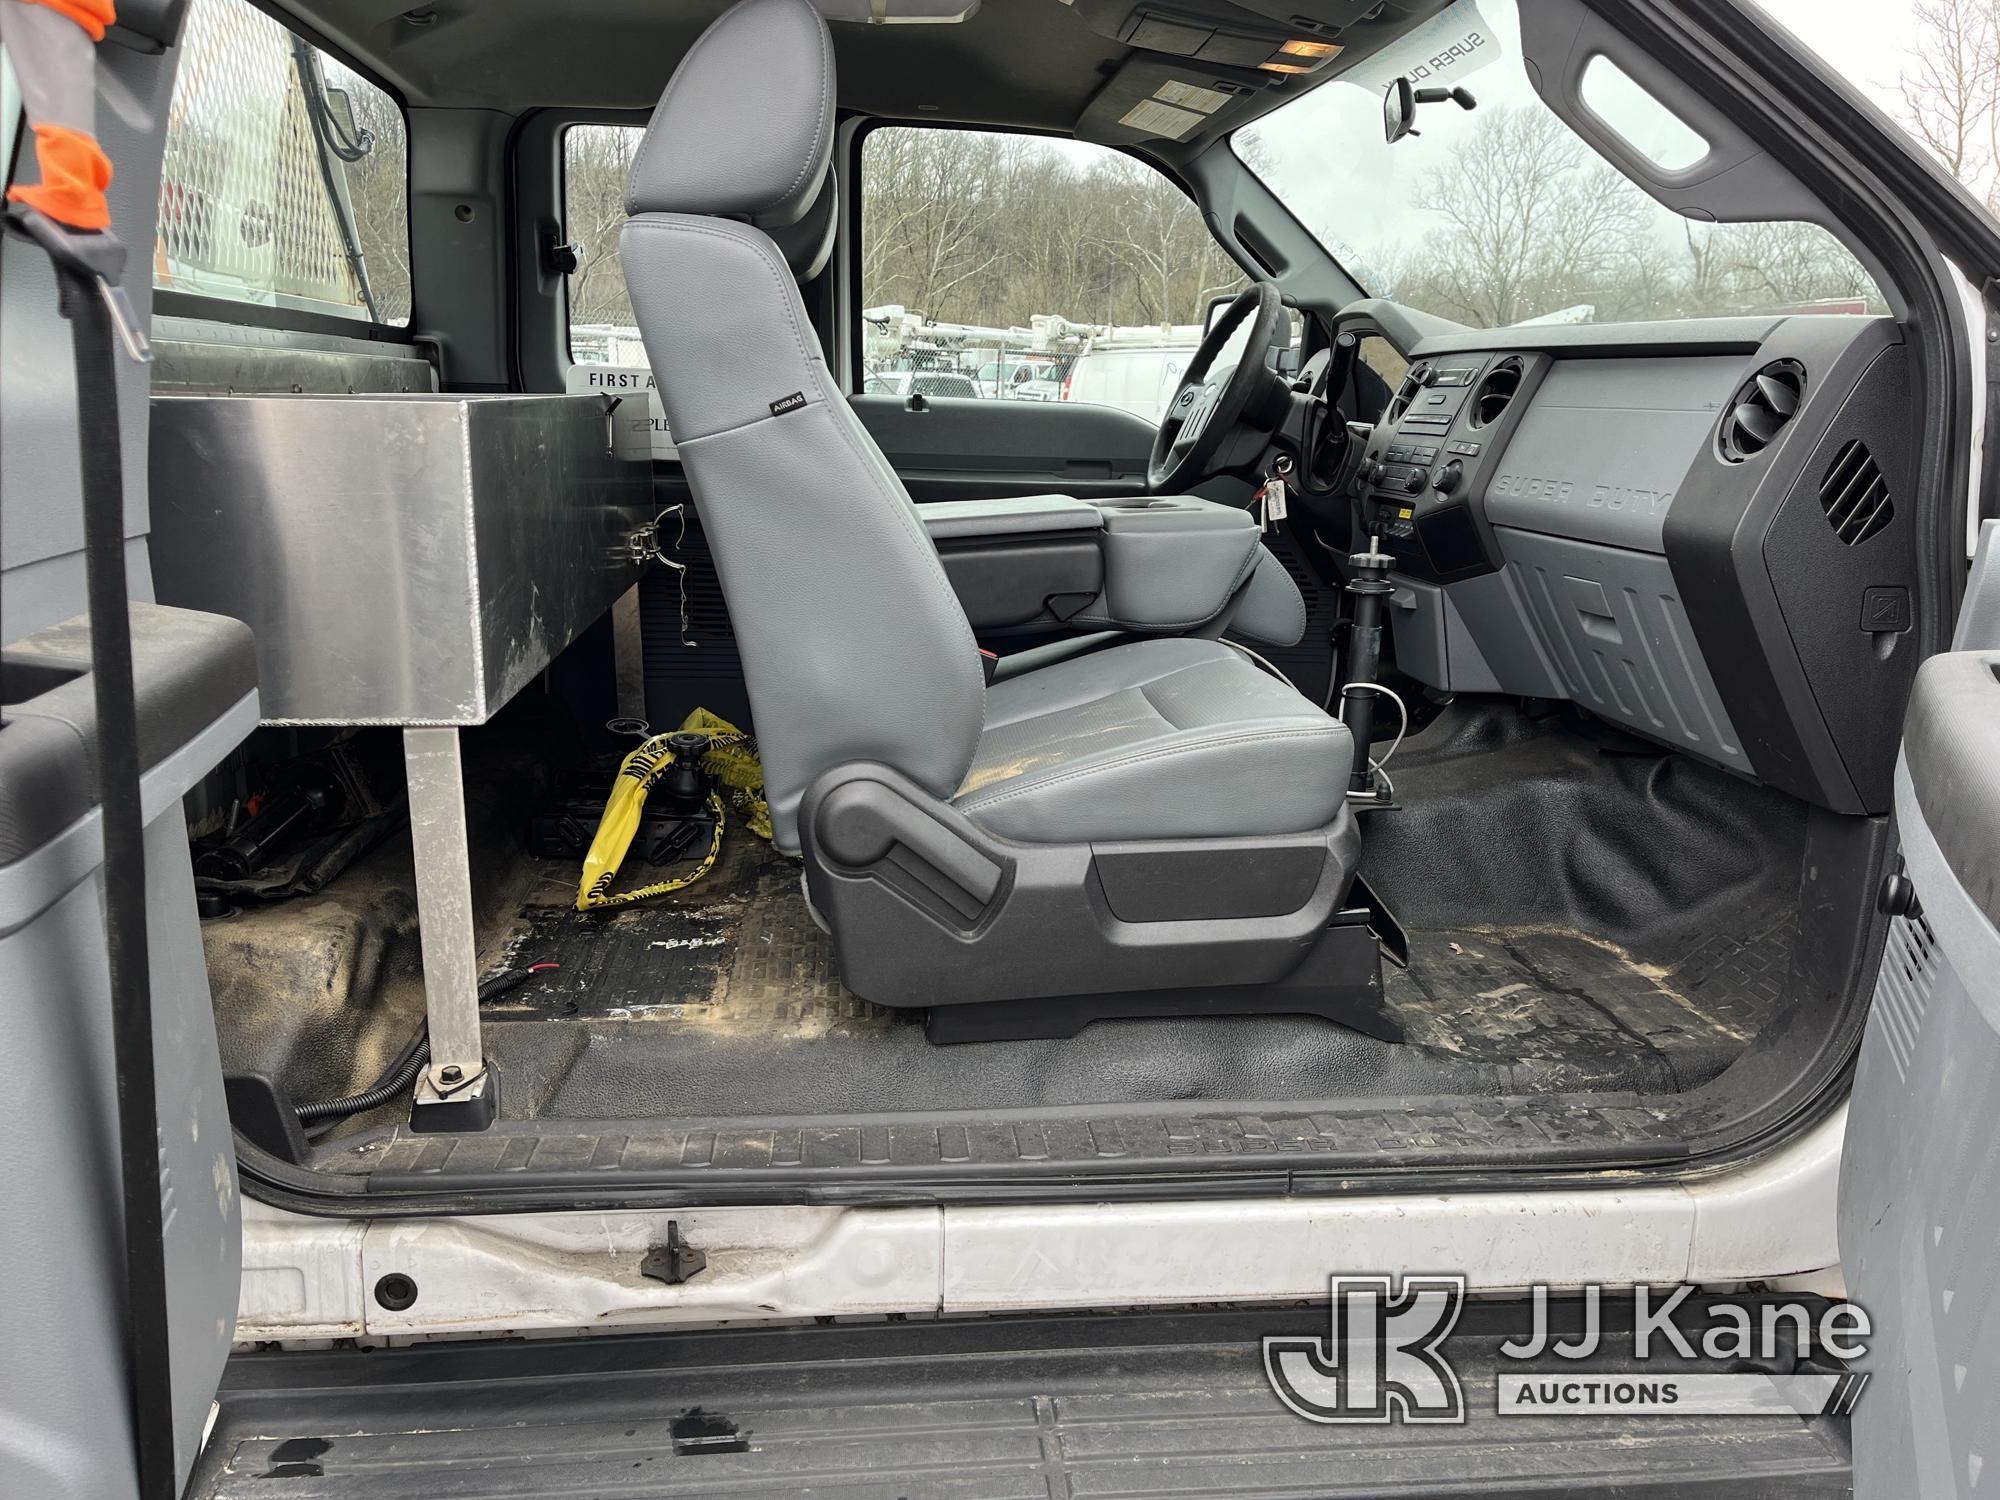 (Smock, PA) 2016 Ford F250 4x4 Extended-Cab Pickup Truck Runs & Moves, Rust, Paint & Body Damage